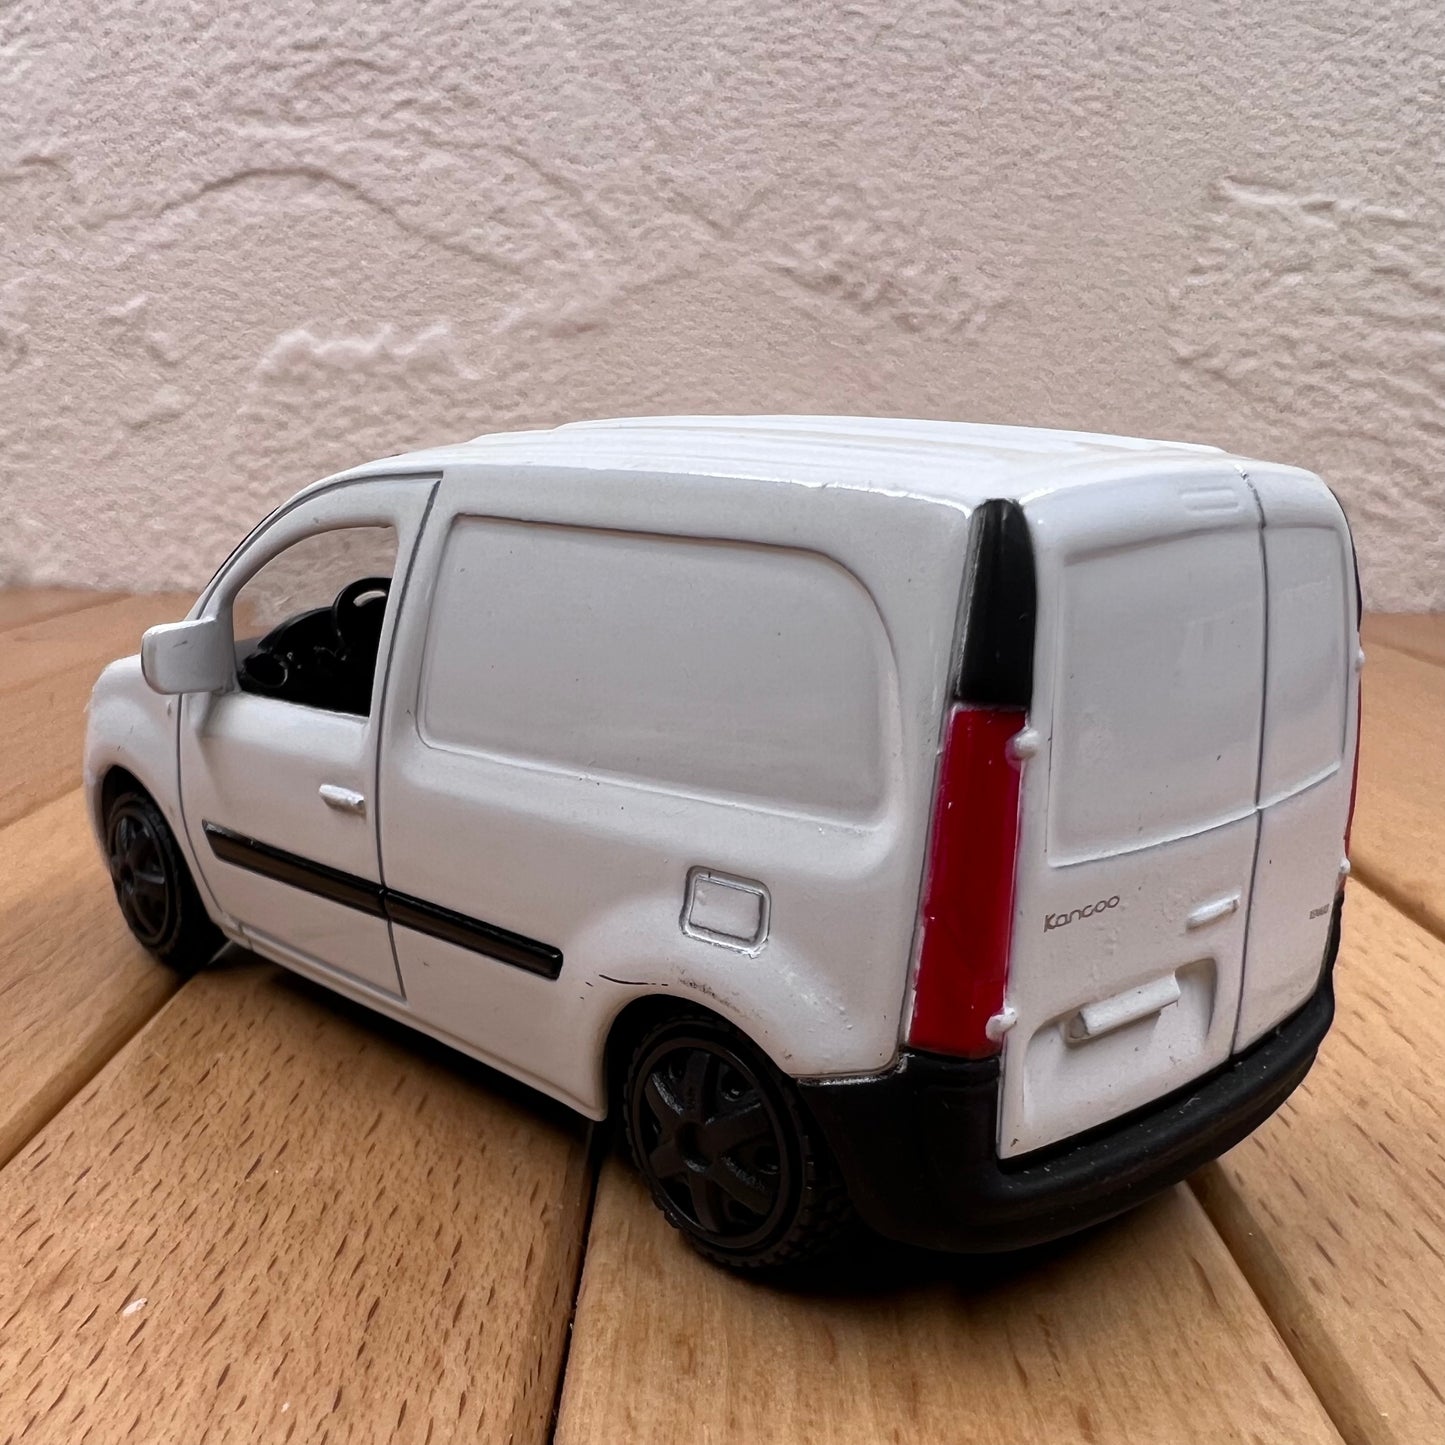 1/43 Scale Renault Kangoo Light Commercial Vehicle Diecast Model Car